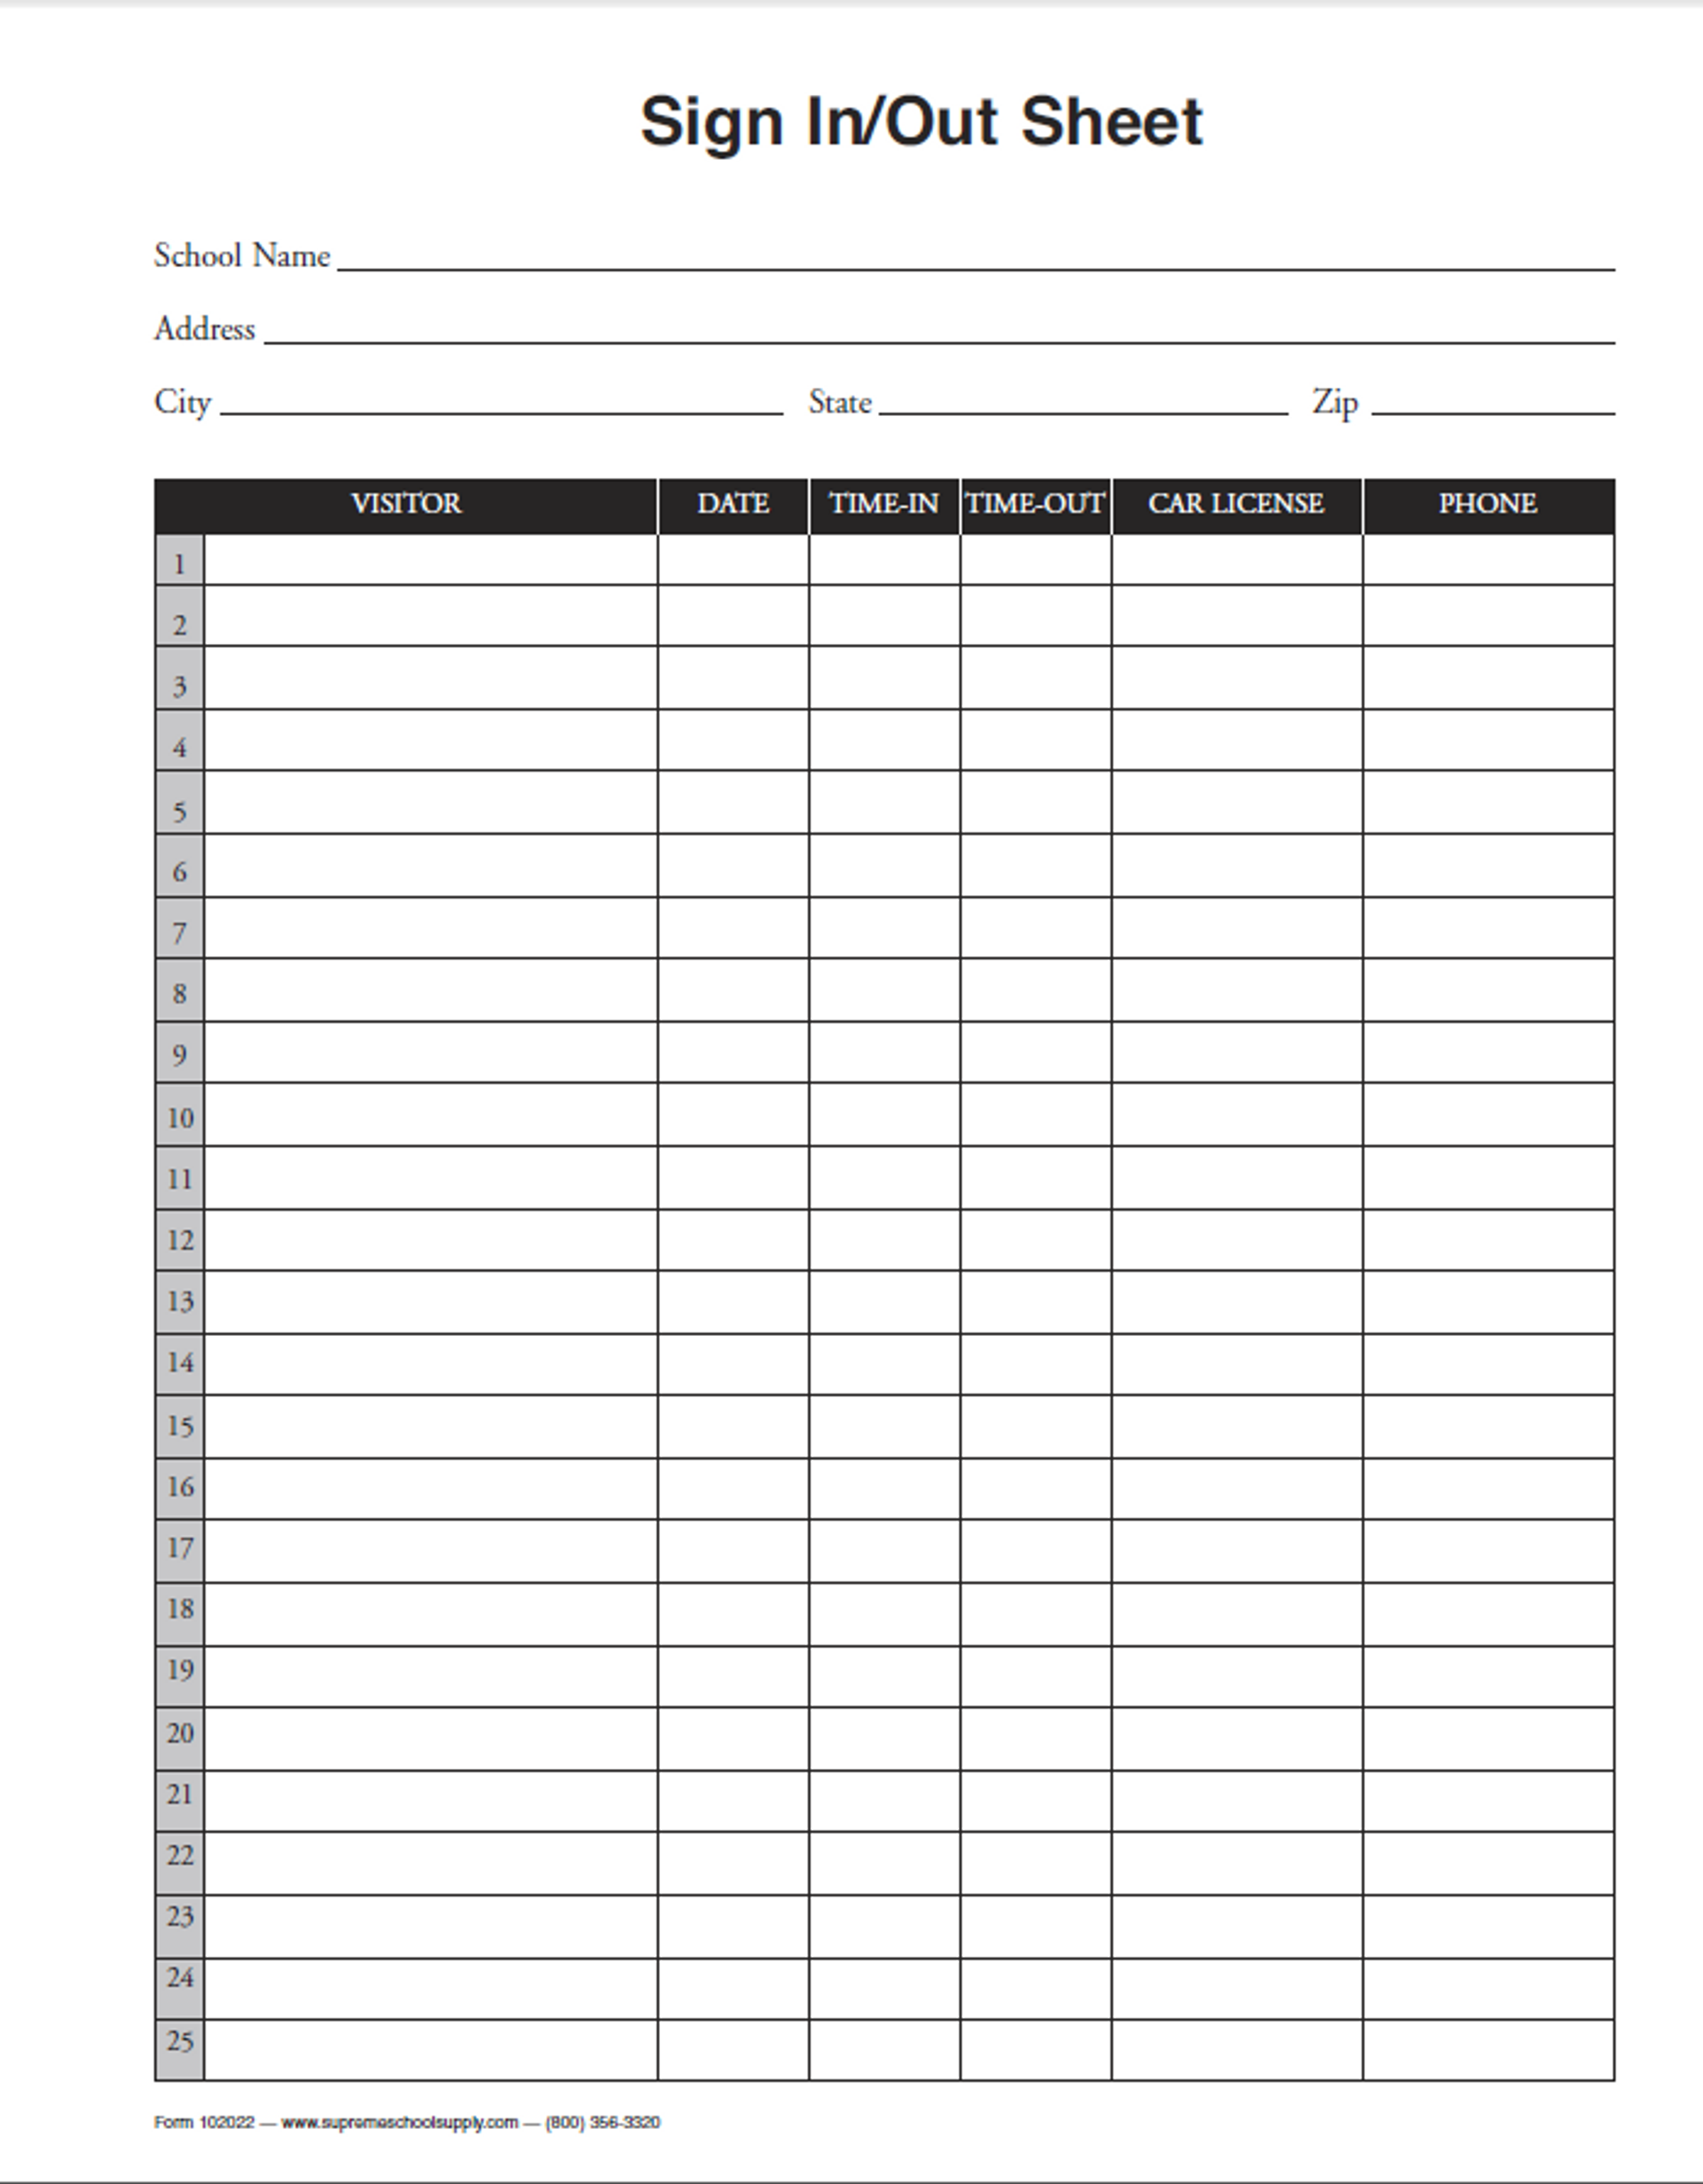 sign-in-out-sheet-102022-supreme-school-supply